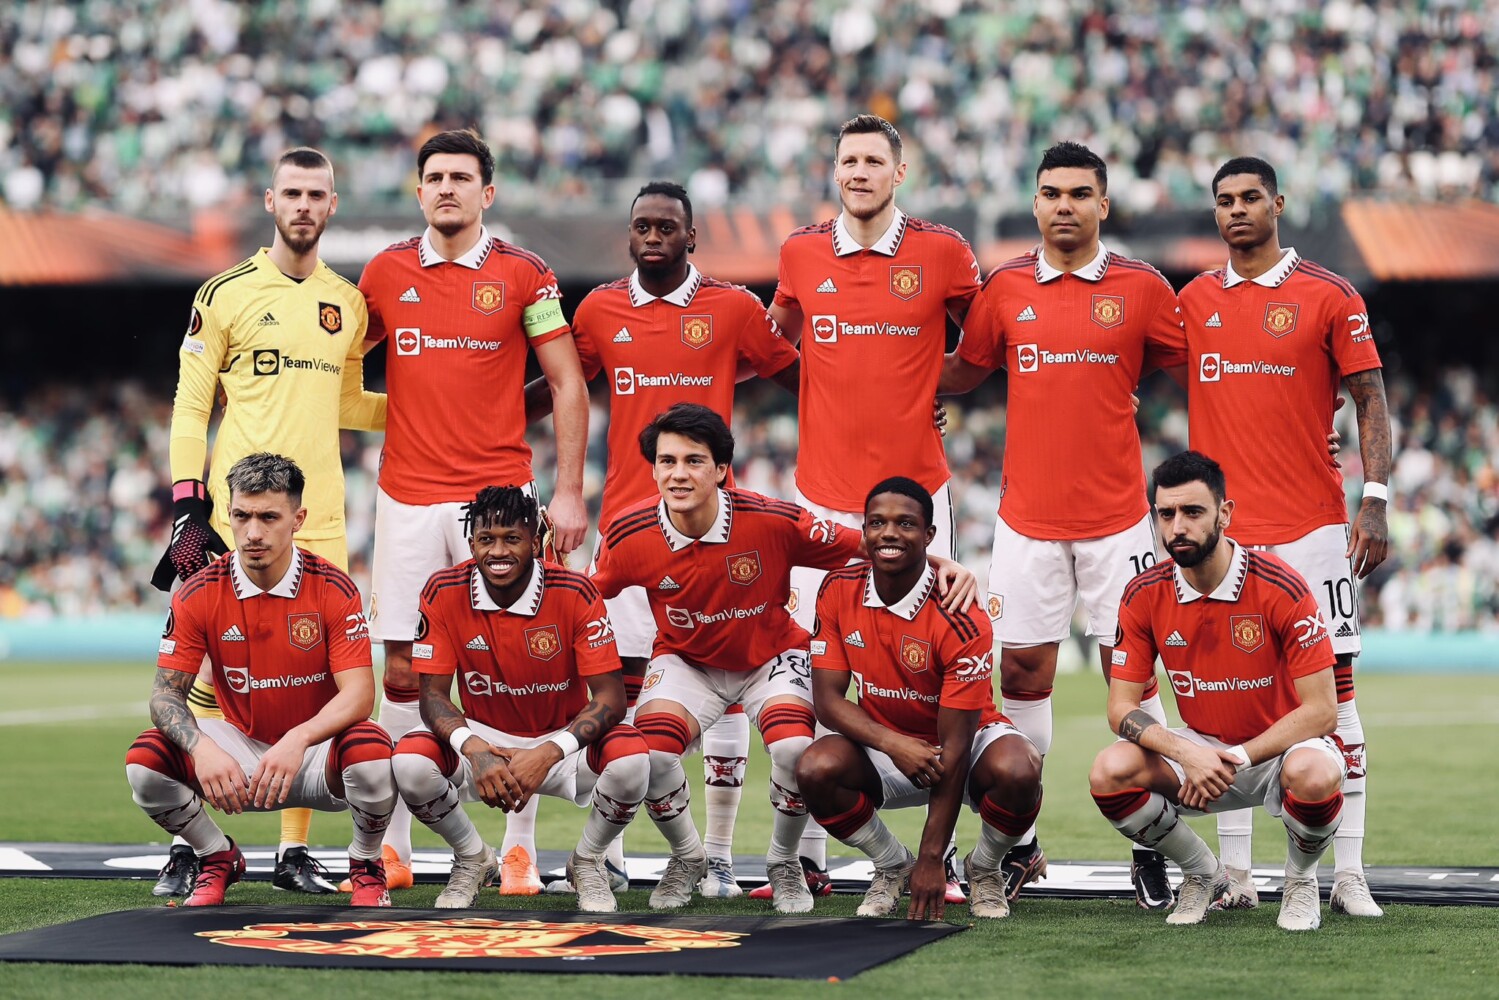 The Manchester United squad poses for a photo before a match.